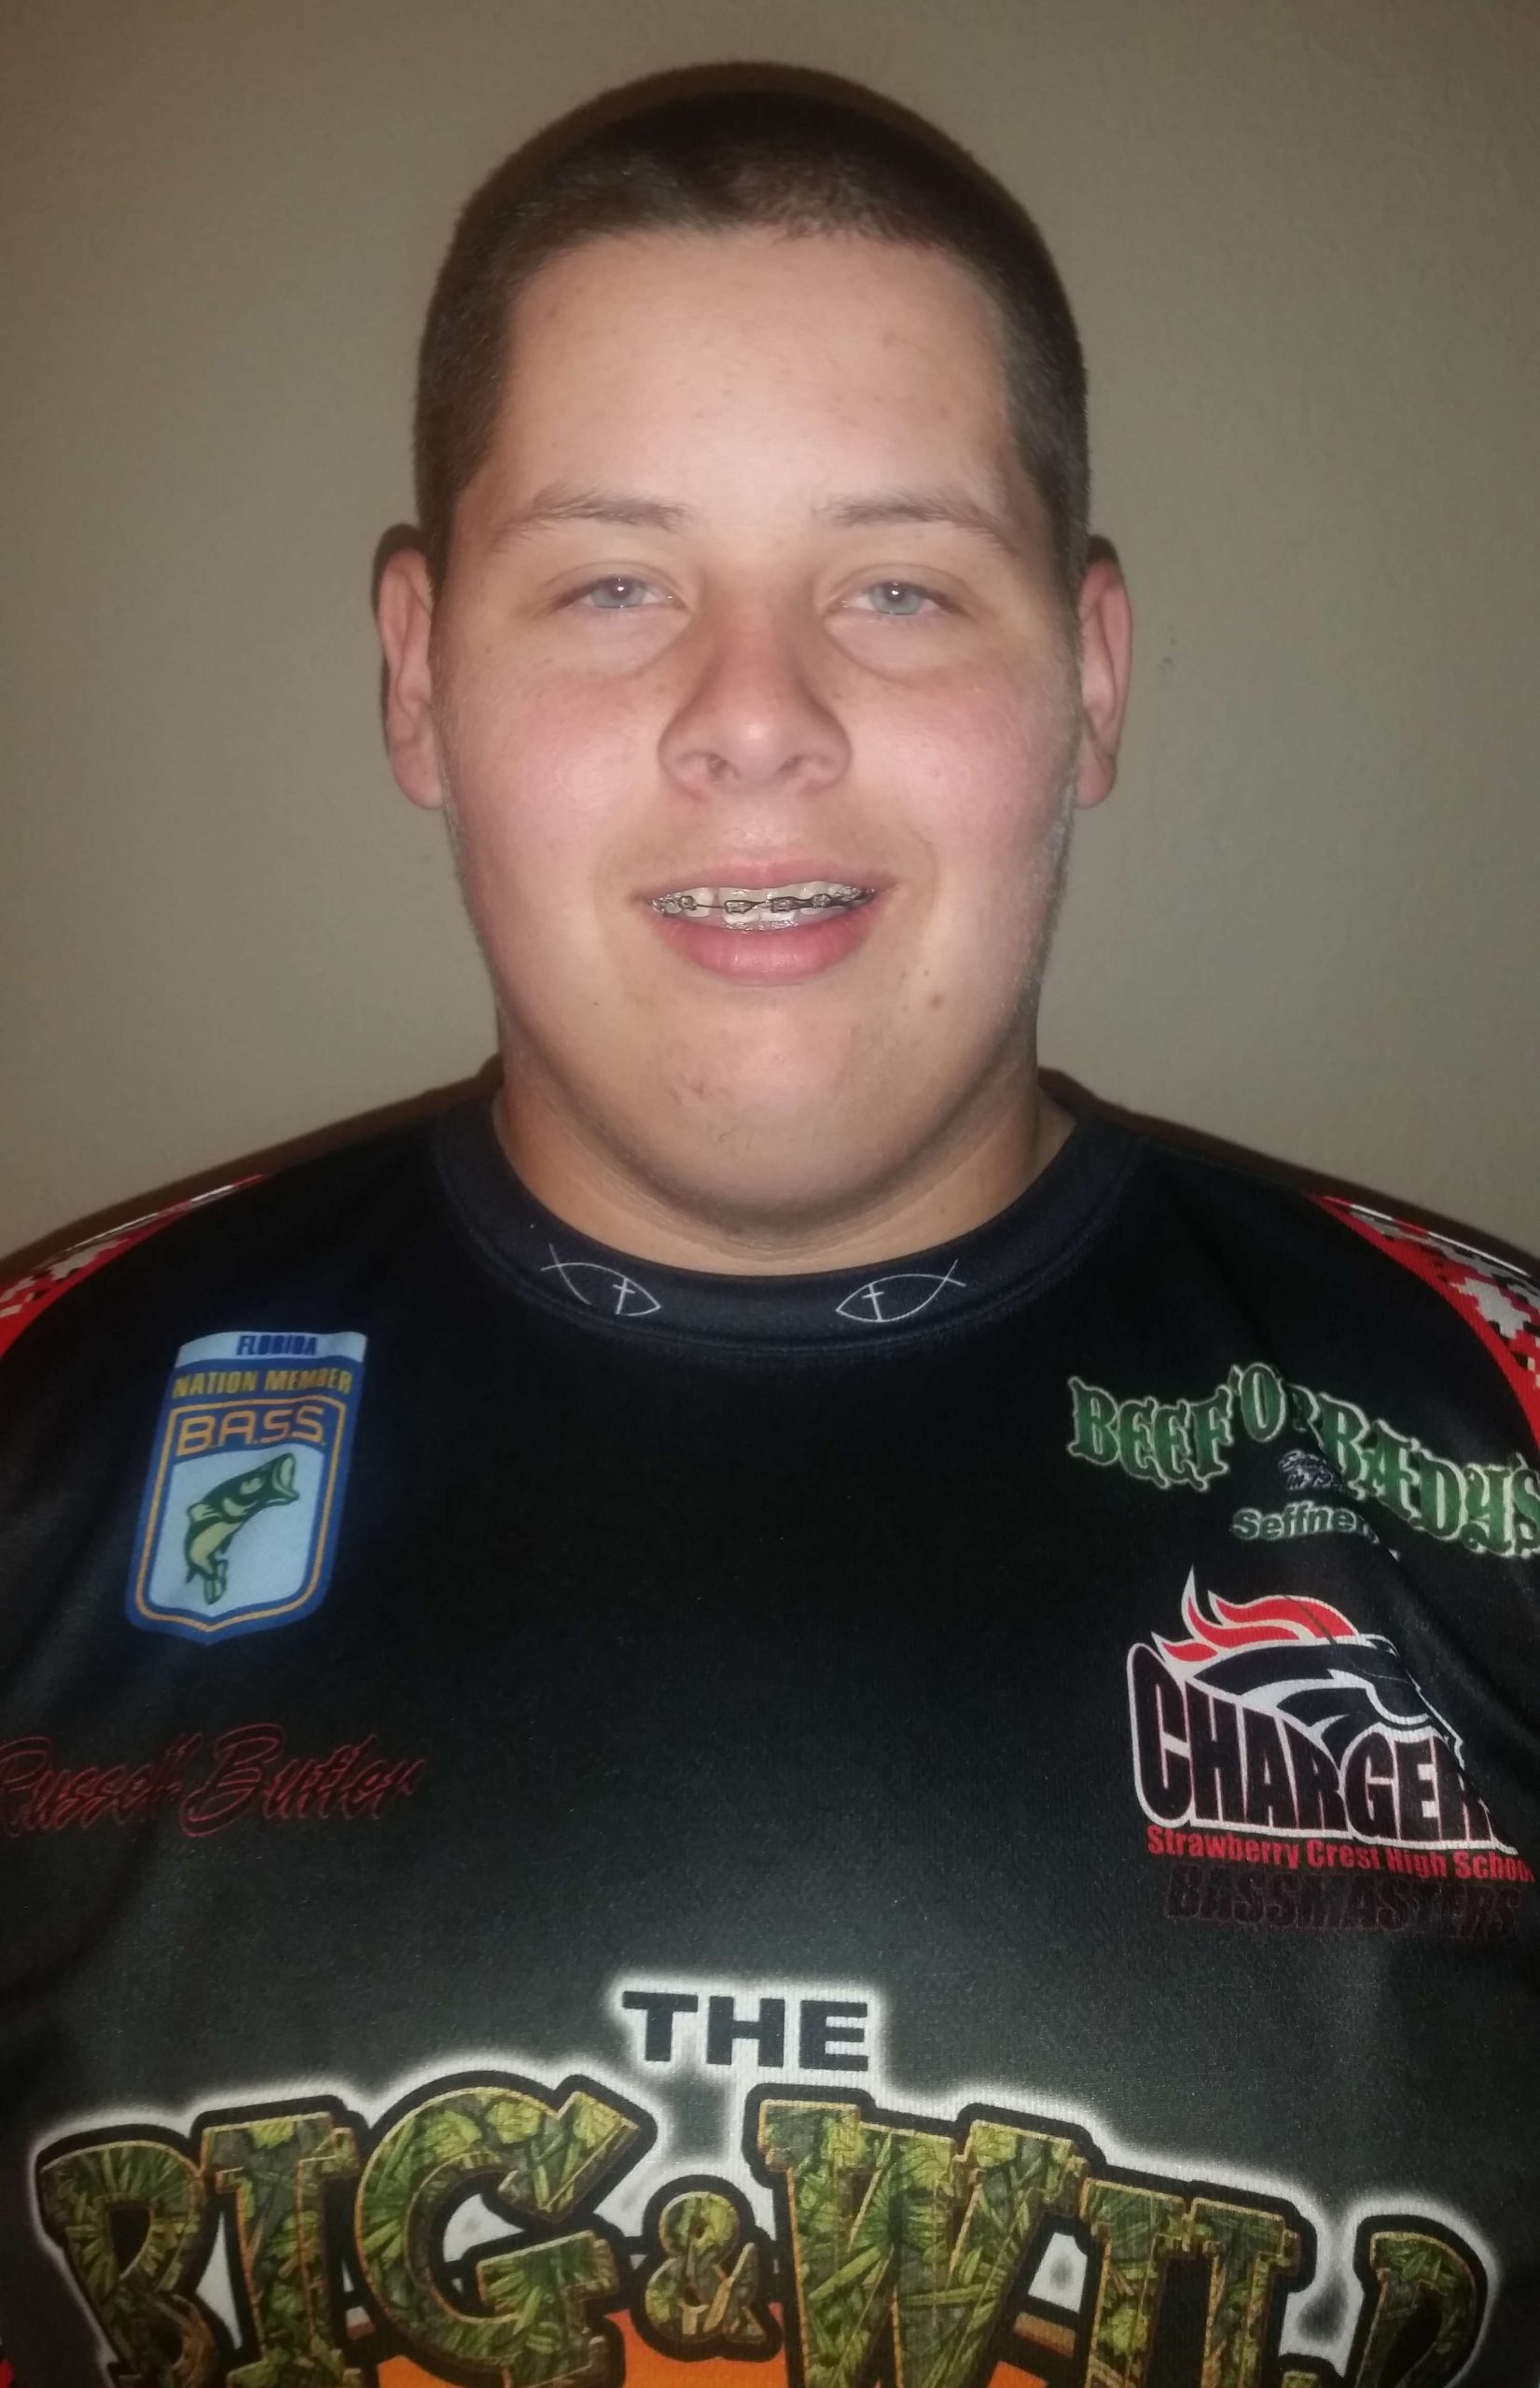 <b>Florida: Russell Butler</b><br>
Butler, of Dover, Fla., was one of the founding members of the Strawberry Crest High School Bassmasters. Butler has five Top 5 finishes to his credit including a third-place finish at the High School Championship on Lake Okeechobee. 
